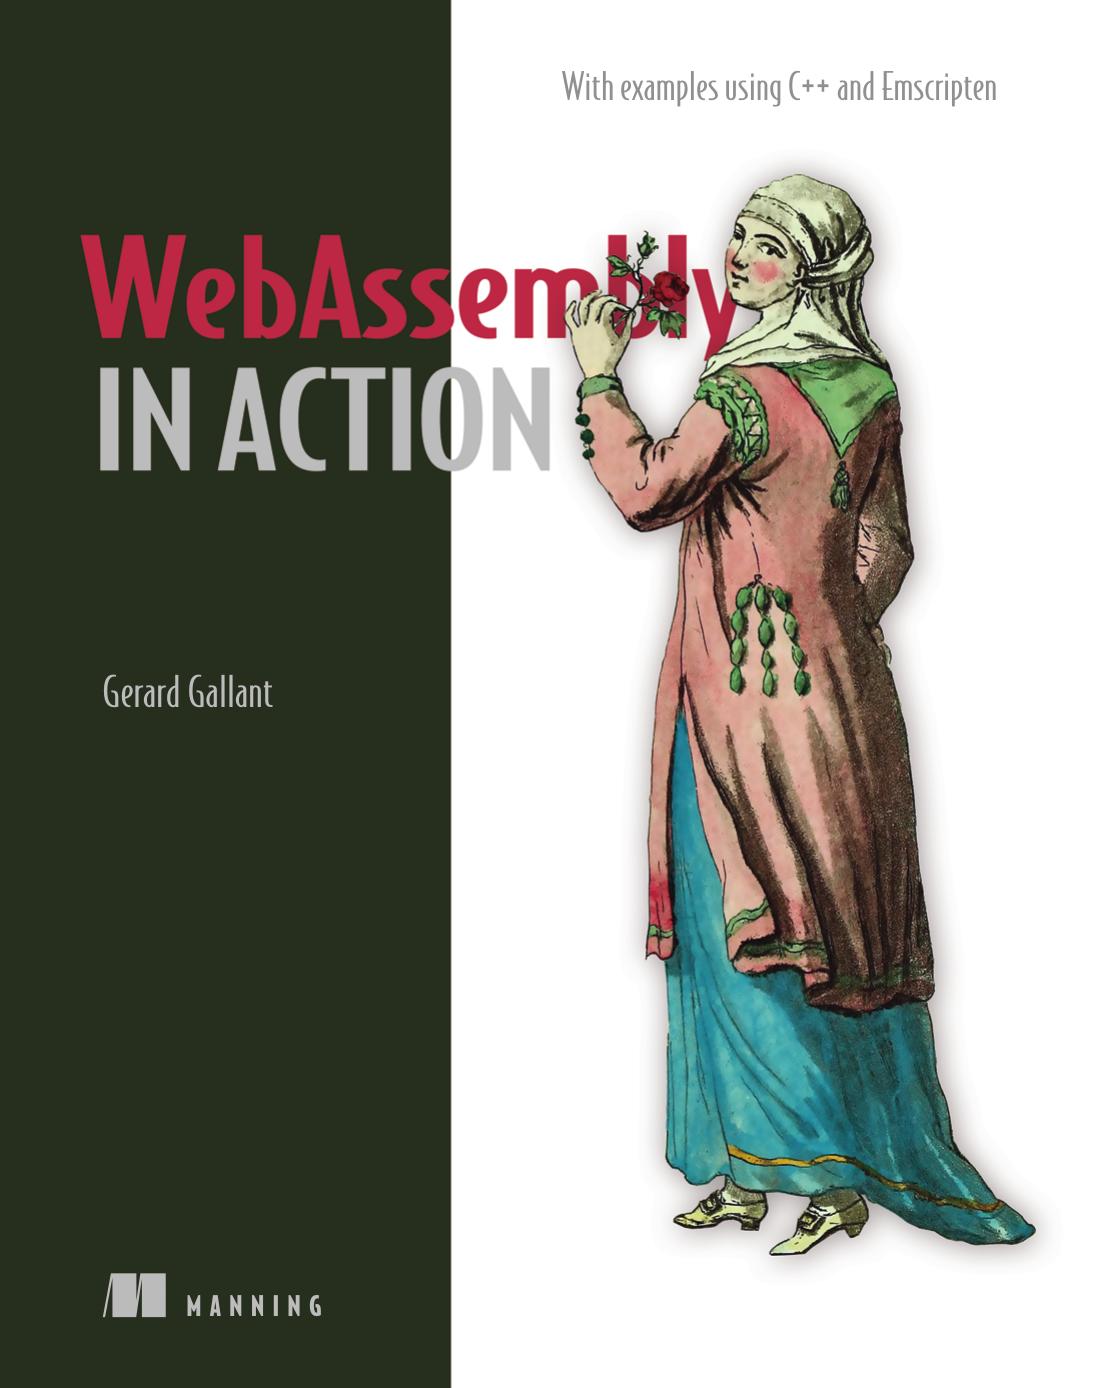 WebAssembly in Action by Gerard Gallant